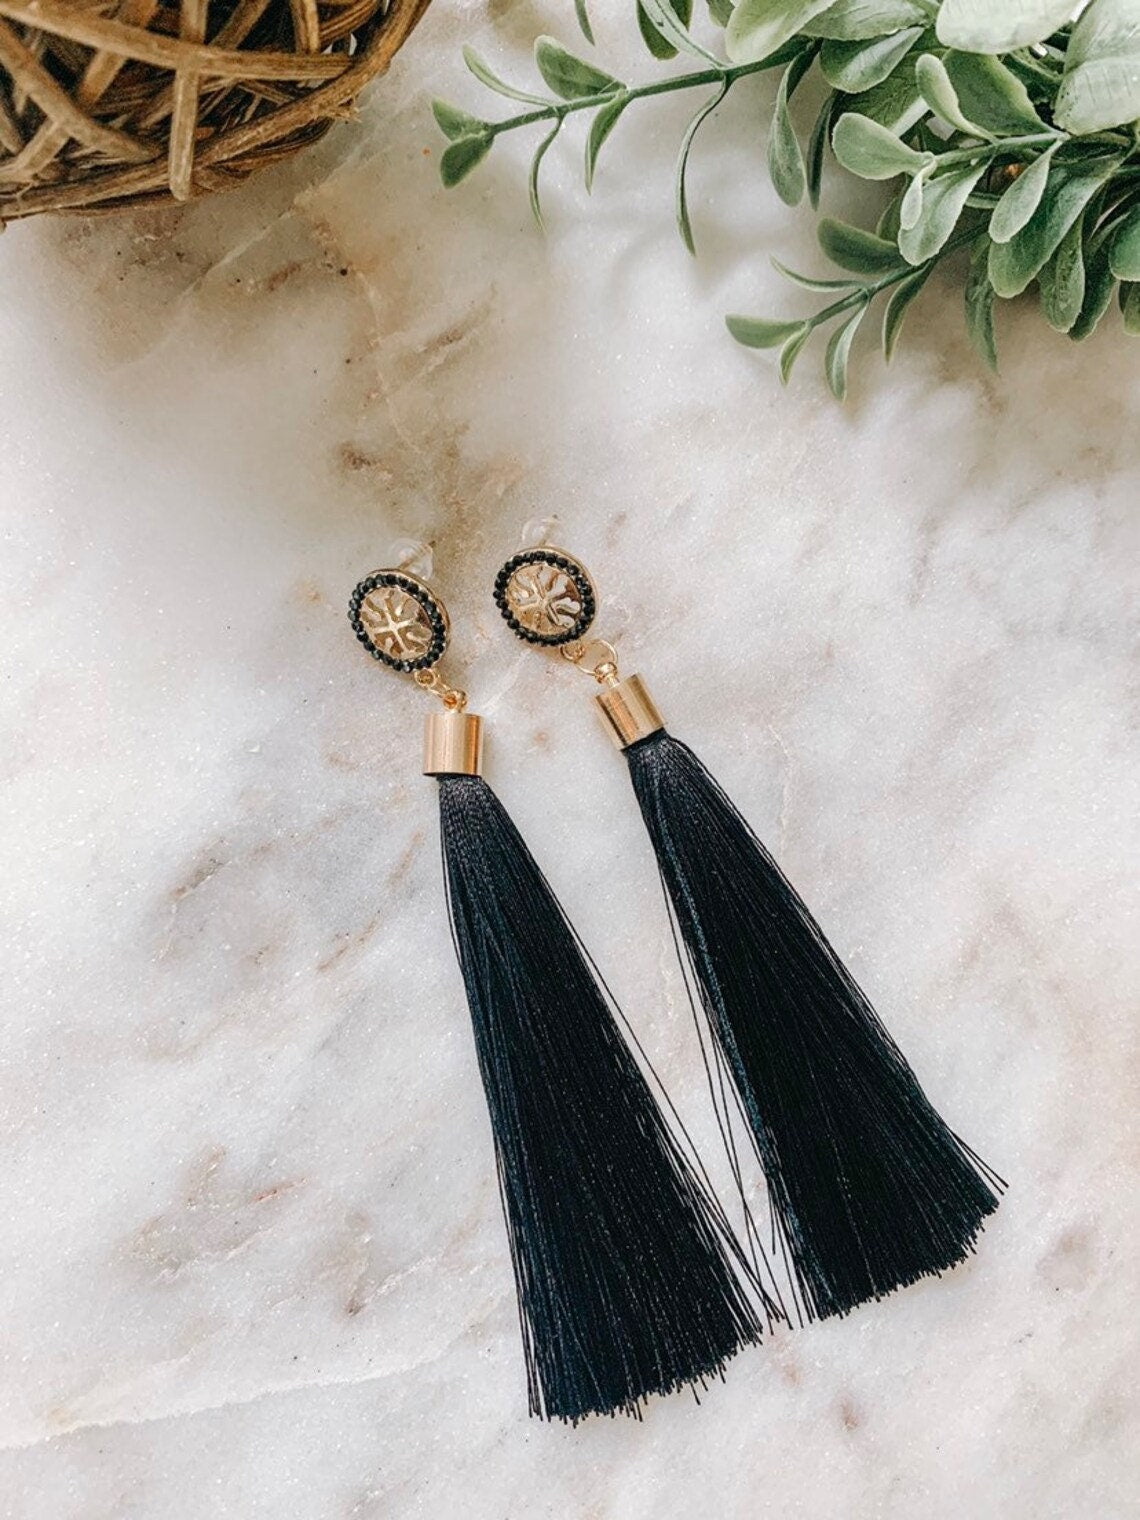 Gold & Tassel Earrings for Women / Statement Earrings / Tassel Earrings / Gold Earrings / Gift for Friend / More Colors Available